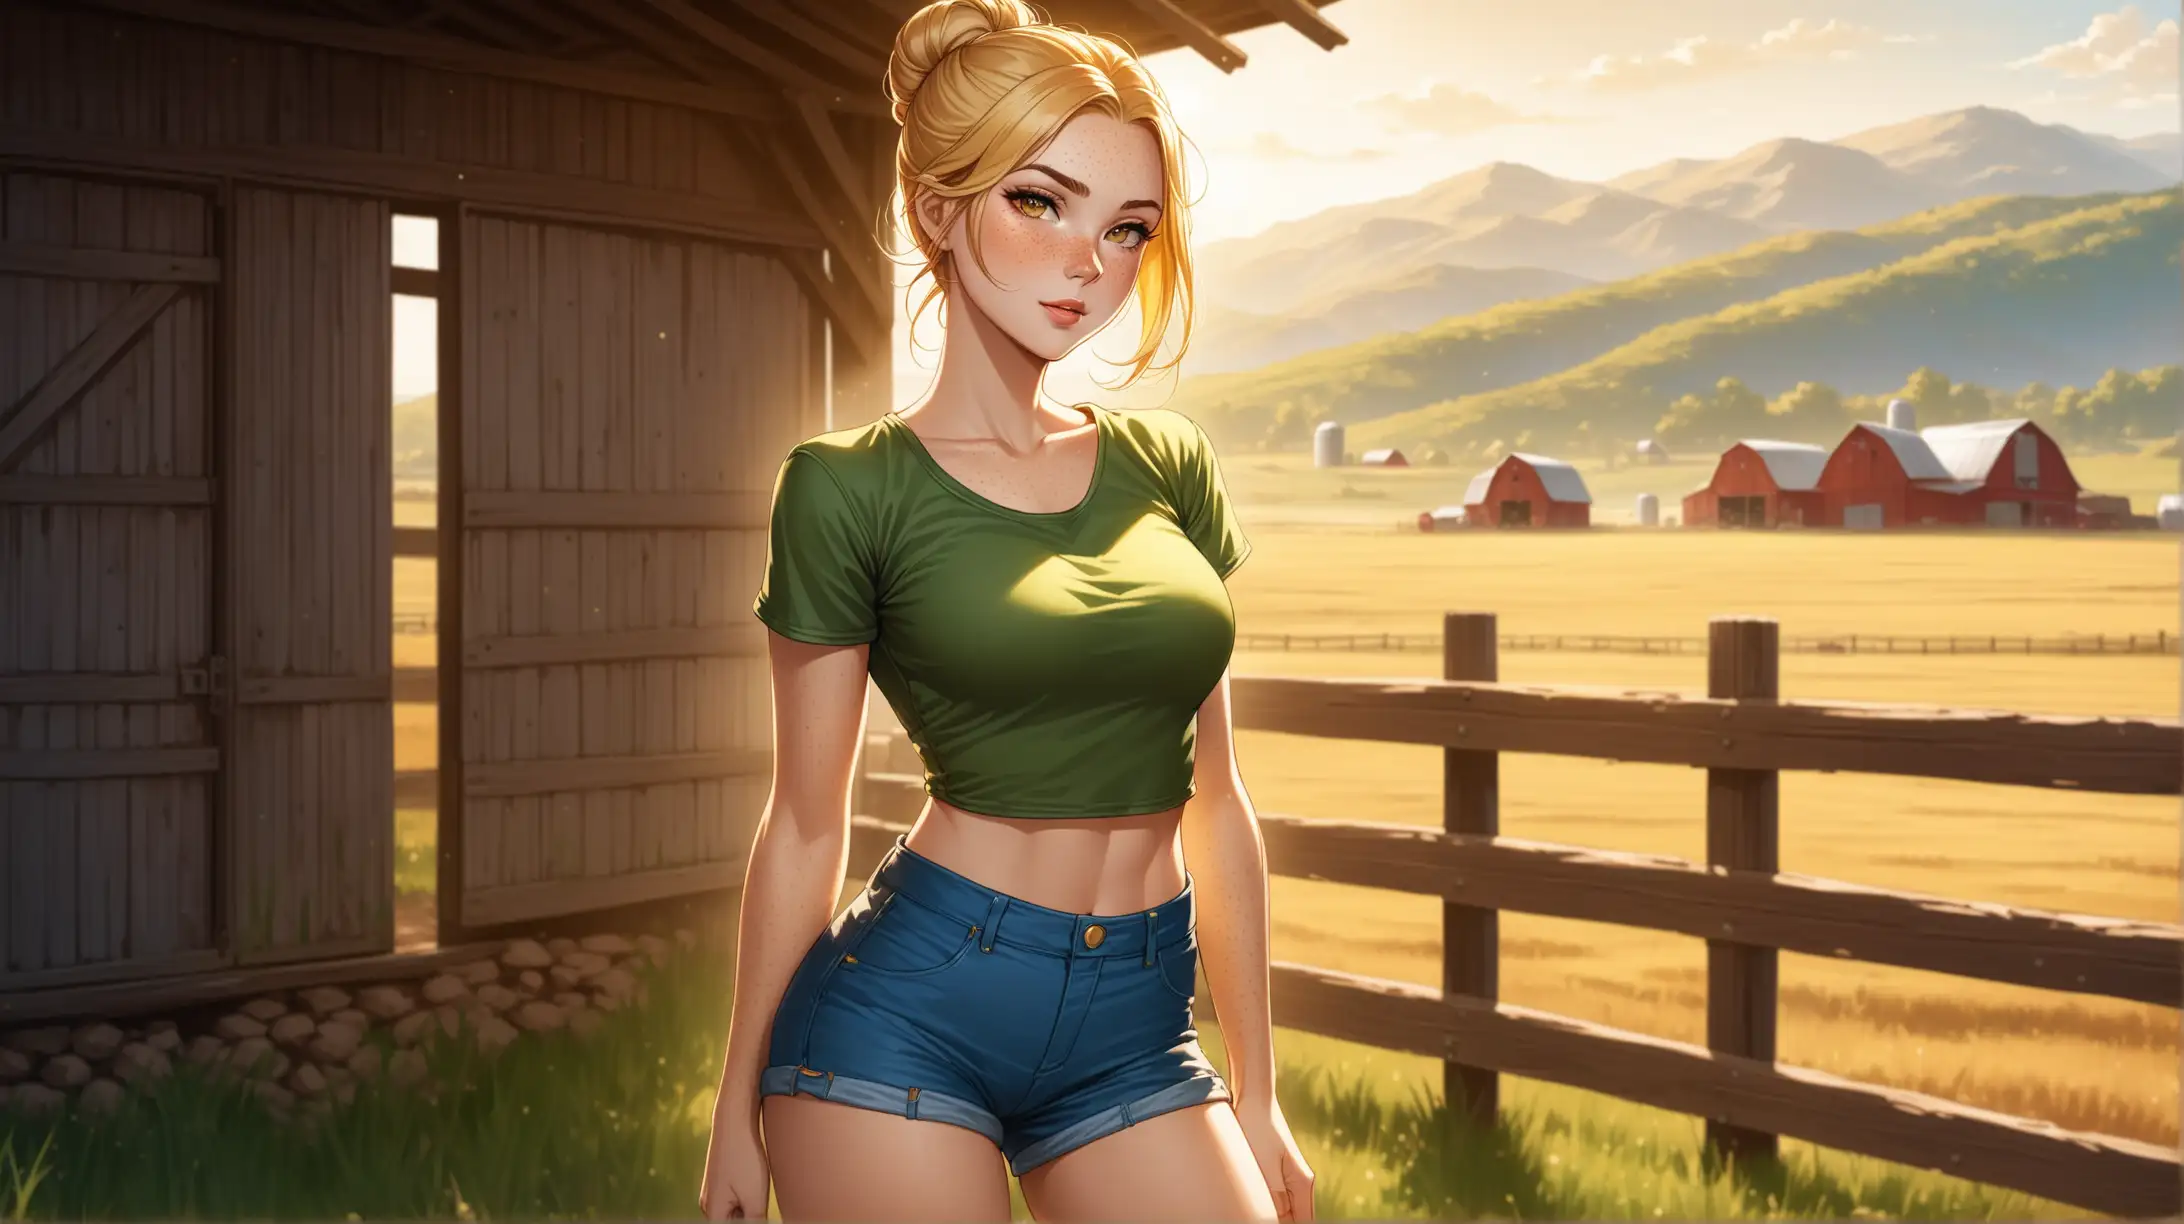 Draw a woman, long blonde hair in a bun, gold eyes, freckles, perky figure, shorts and shirt inspired from the Fallout series, high quality, cowboy shot, outdoors, farm setting, seductive pose, natural lighting, loving gaze toward the viewer